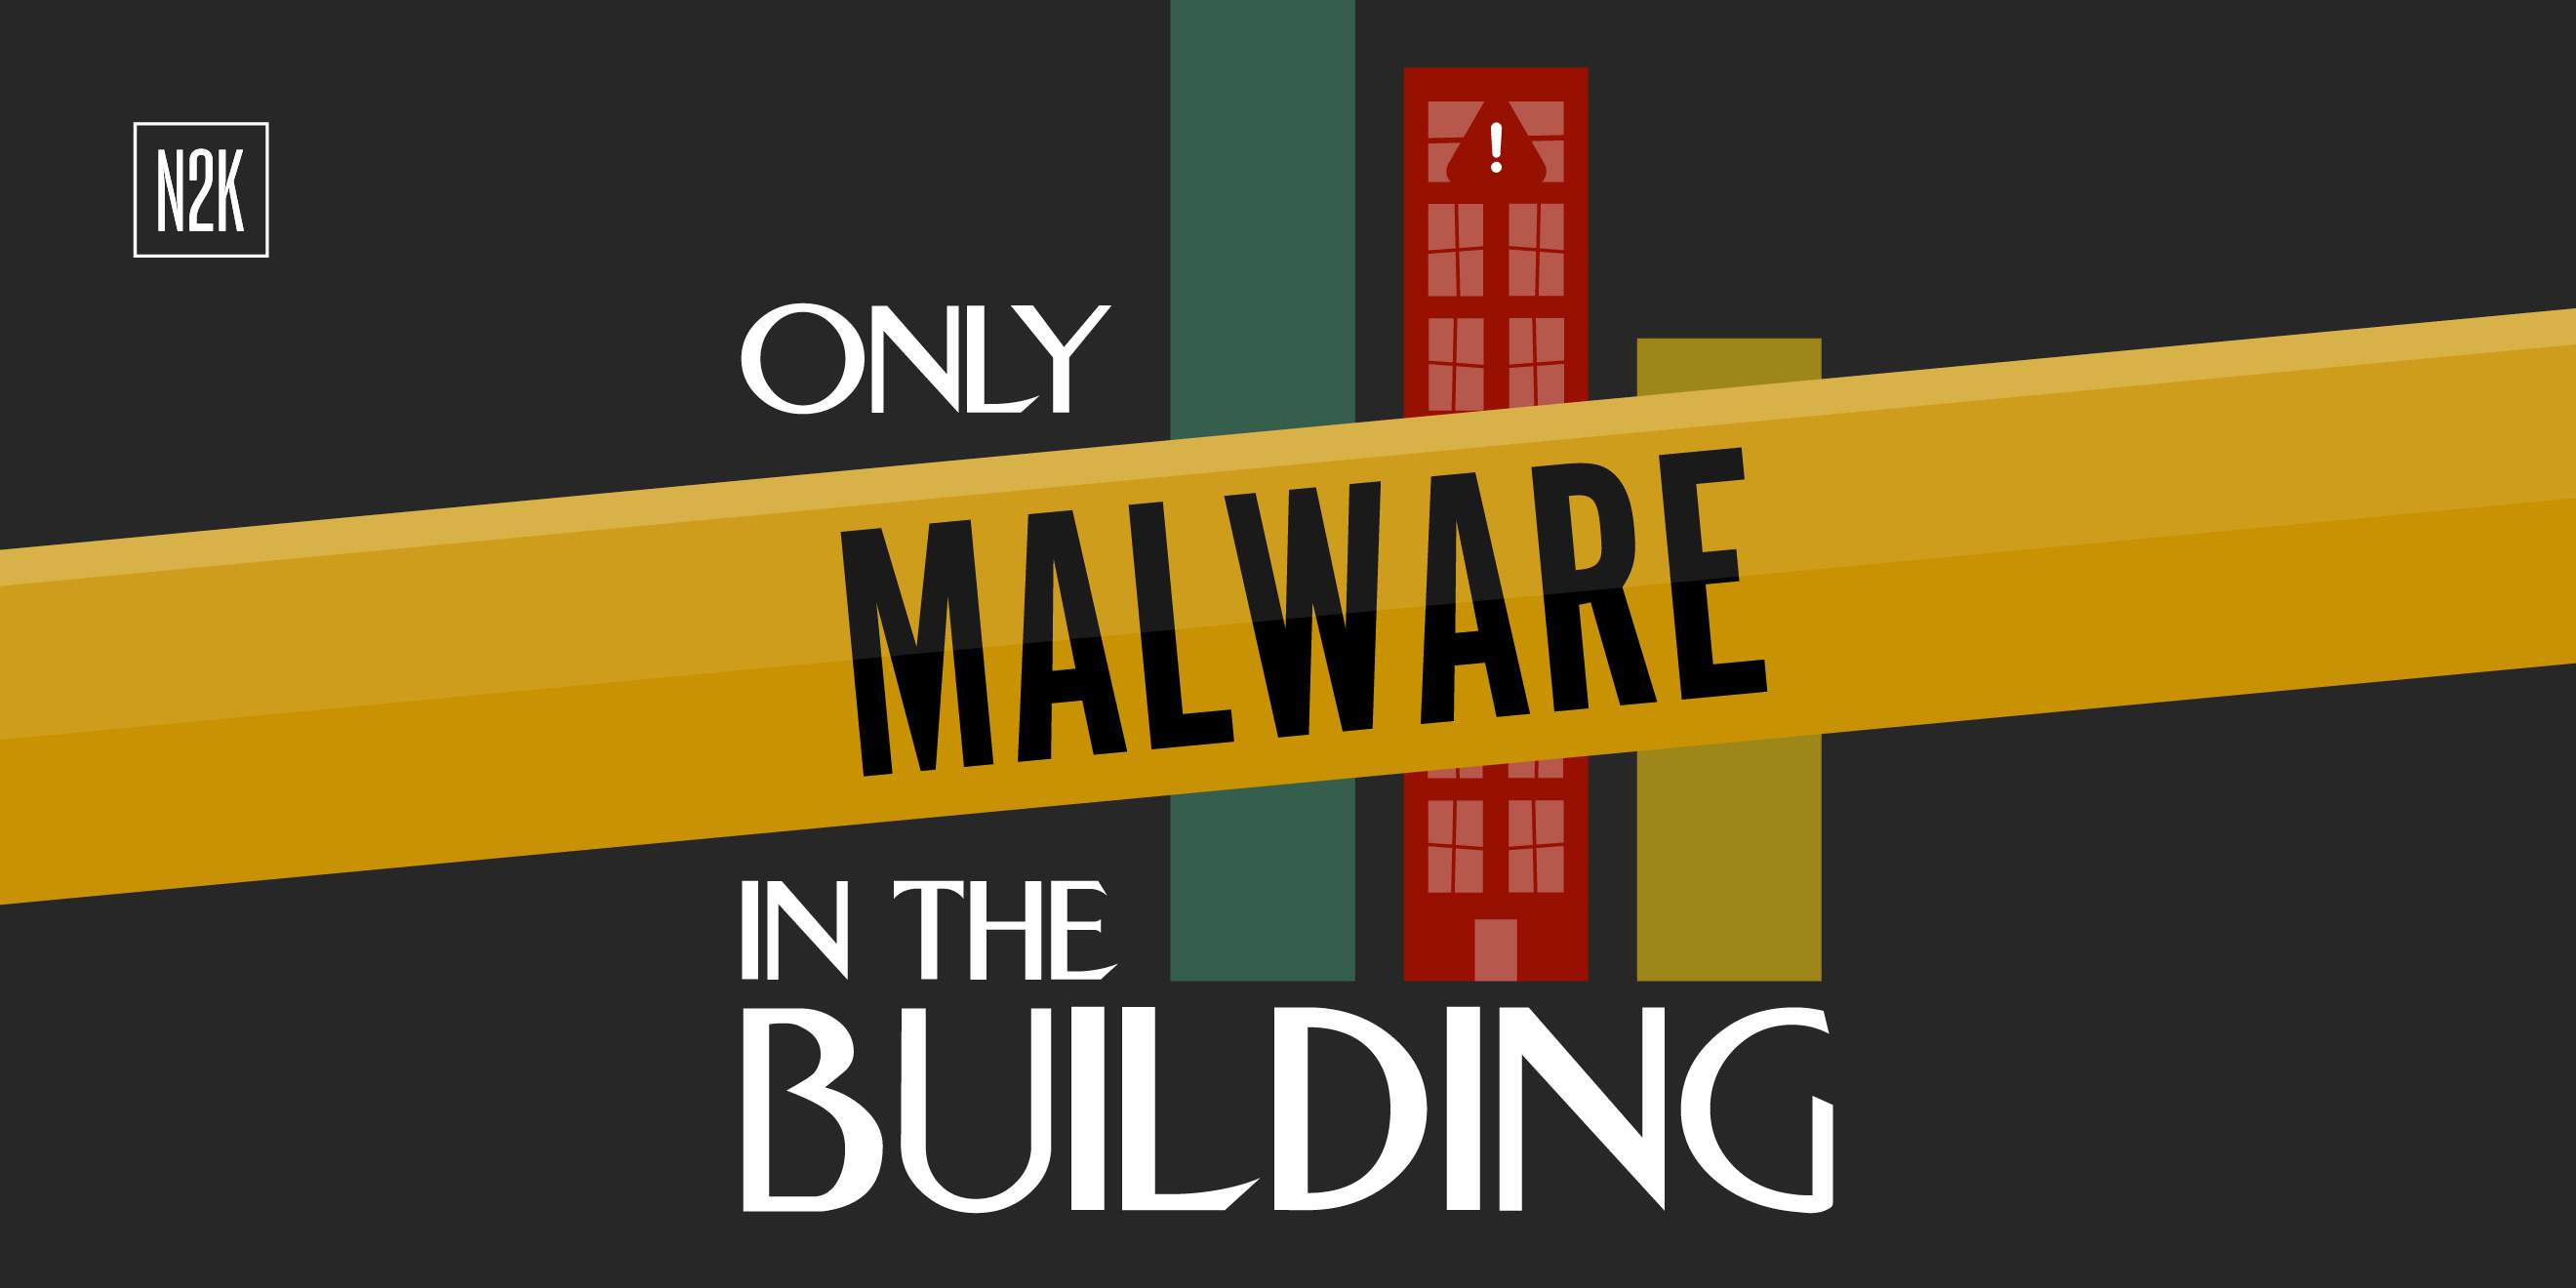 Only Malware in the Building 7.2.24